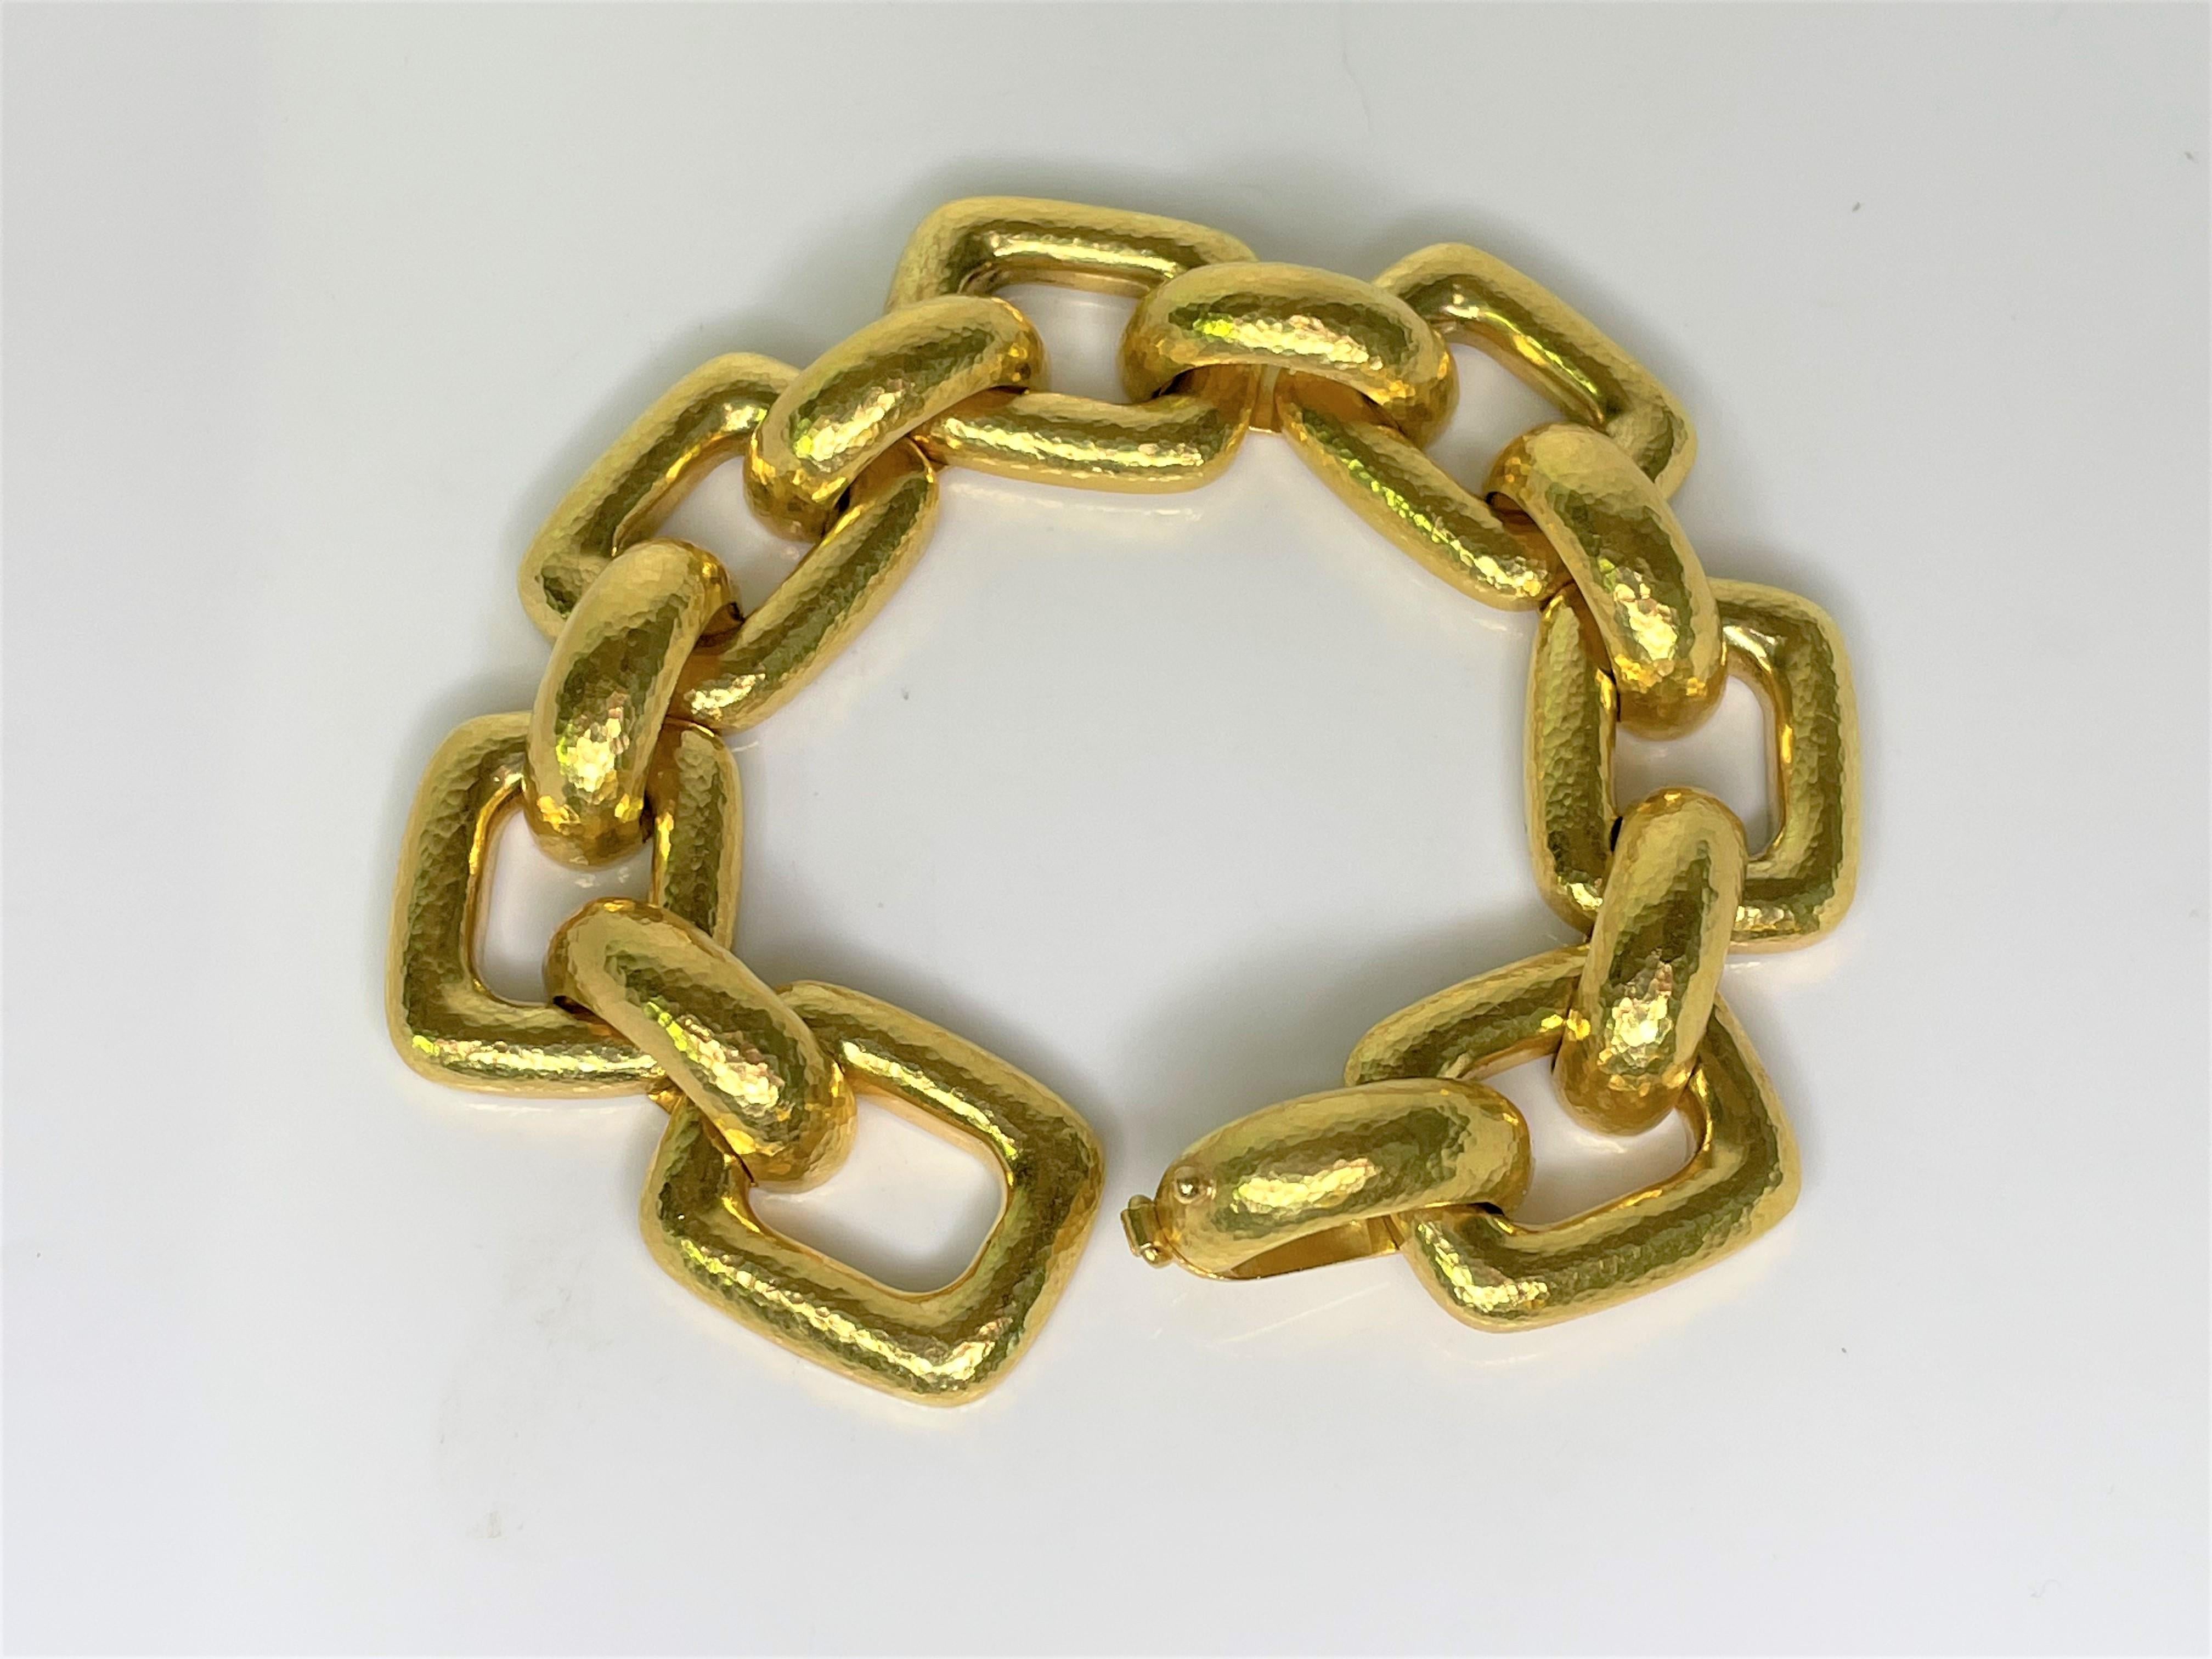 By designer Elizabeth Locke
19 karat solid hammered yellow gold.
8.25 inches long, 0.82 inches wide
Stamped 